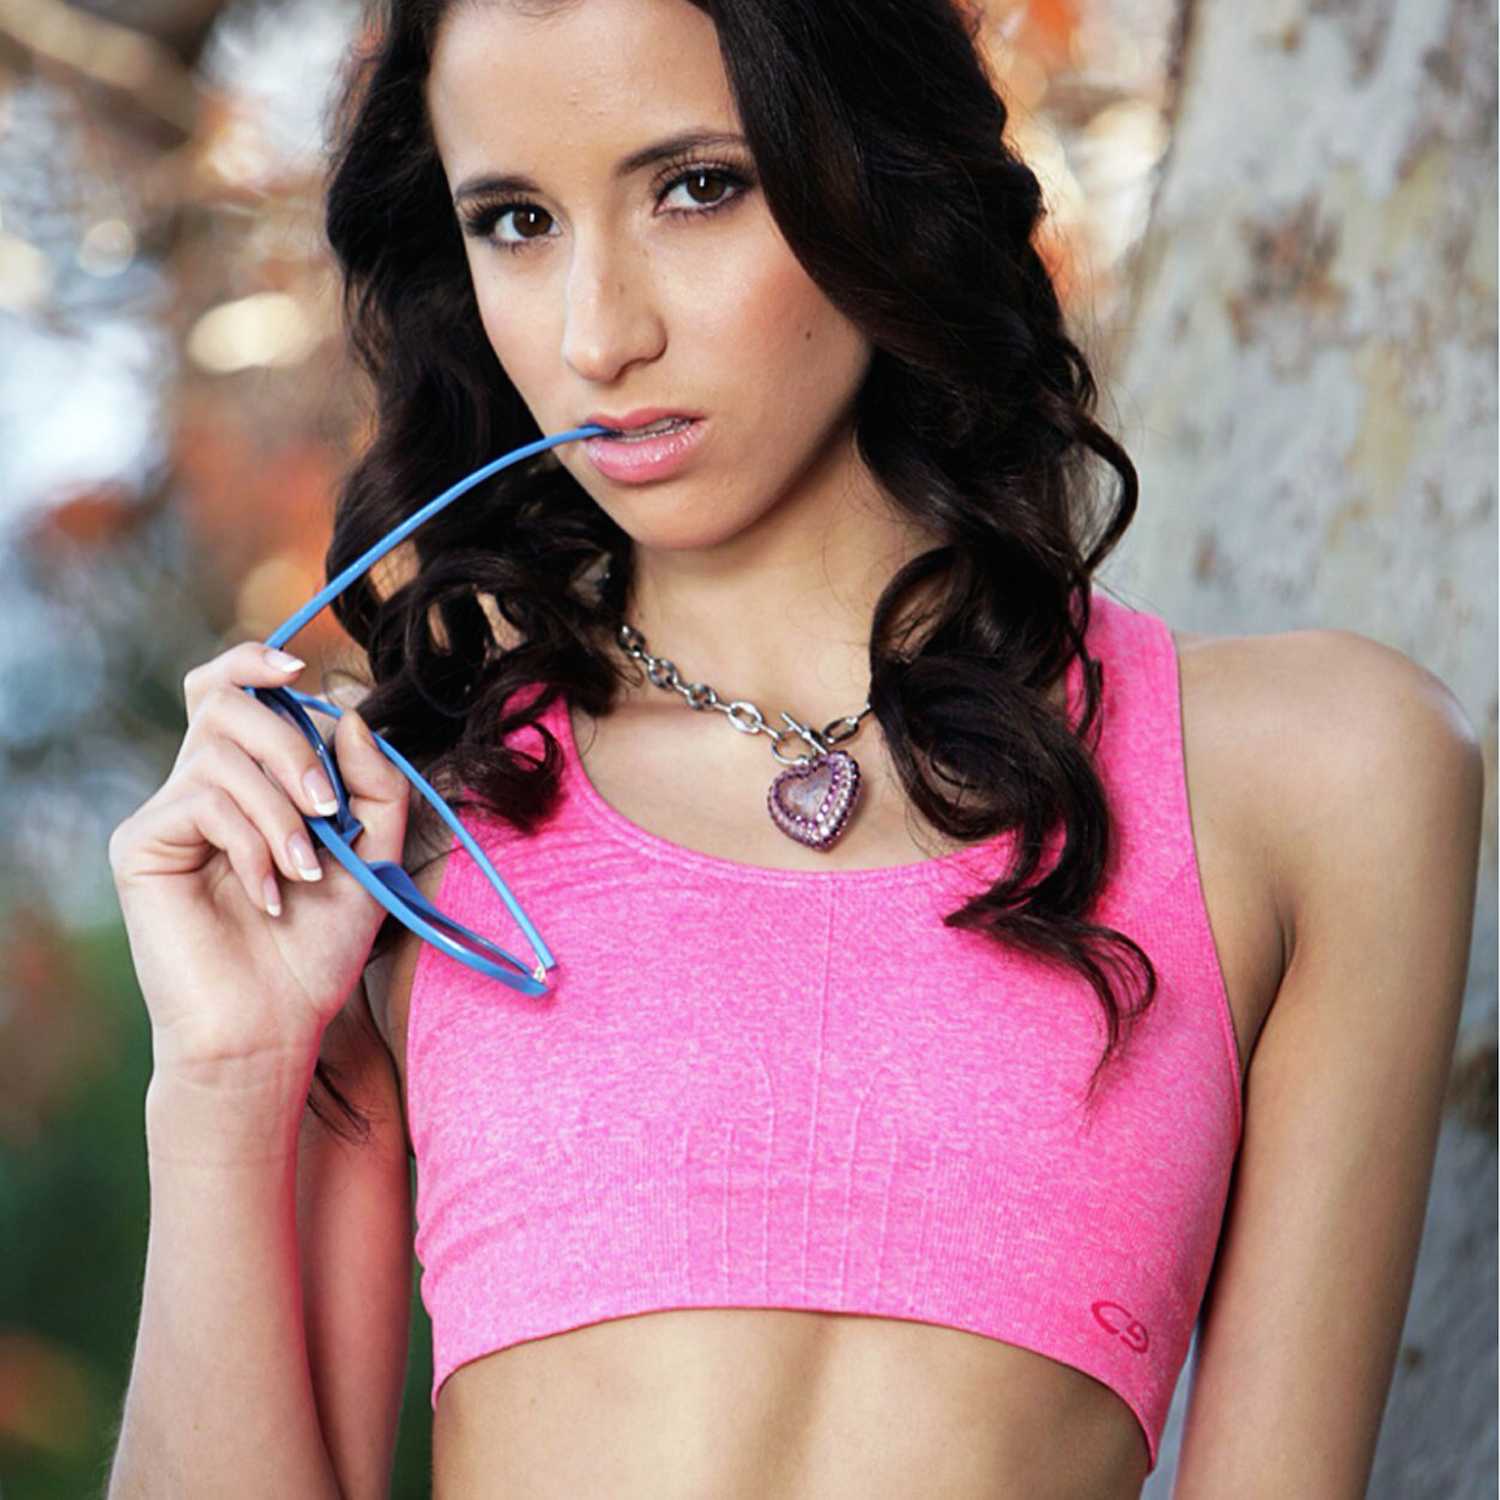 Business Porn Star - Belle Knox: A Feminist in the Porn Business â€“ The Independent